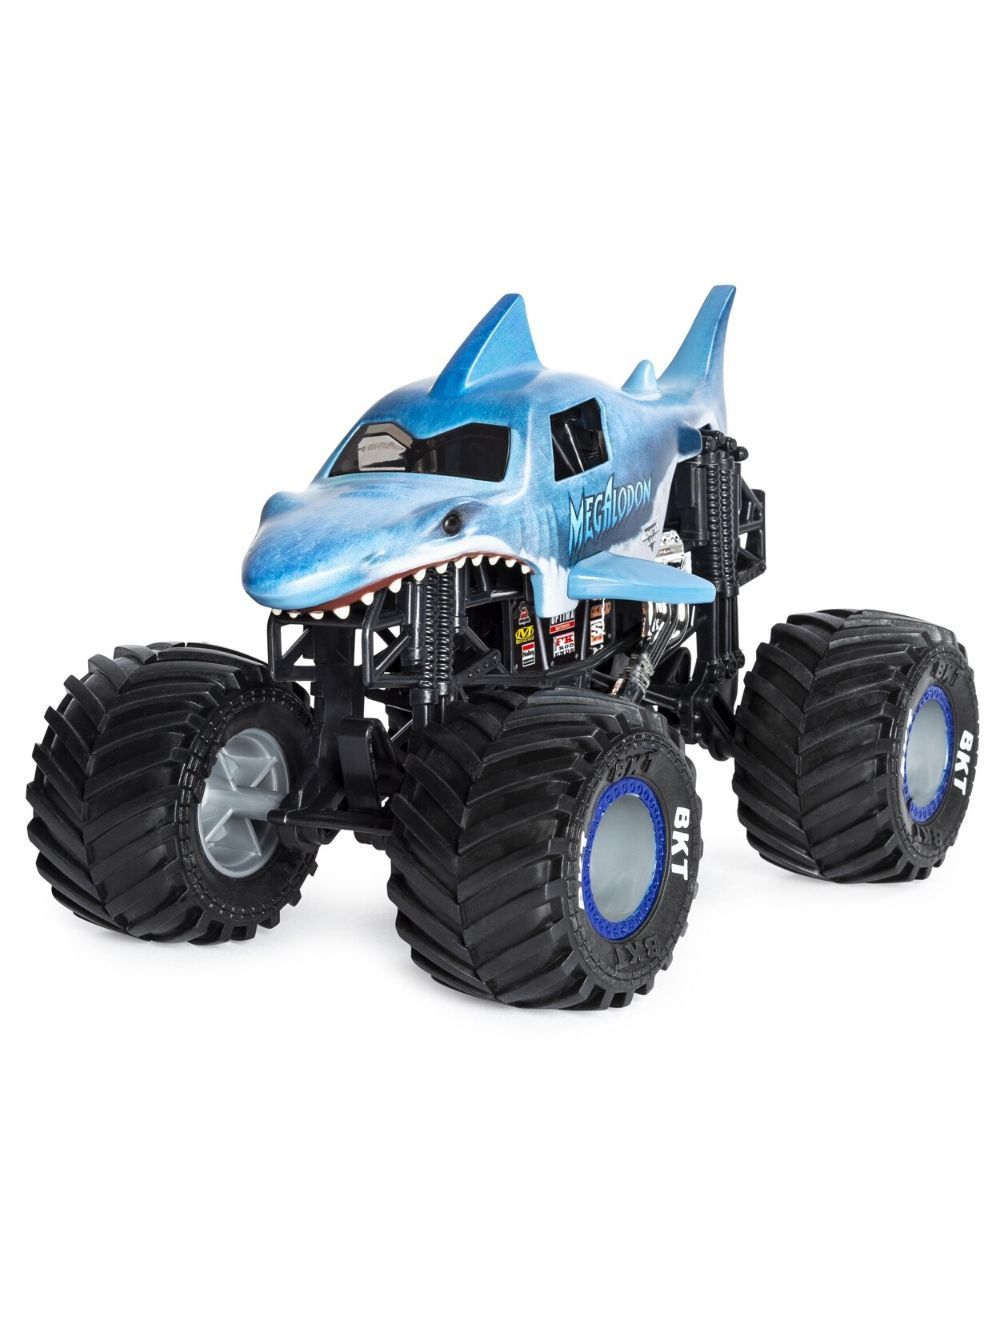 Wash the car - Haunted Monster Truck, Wash the car - Haunted Monster Truck, By Home For Kids